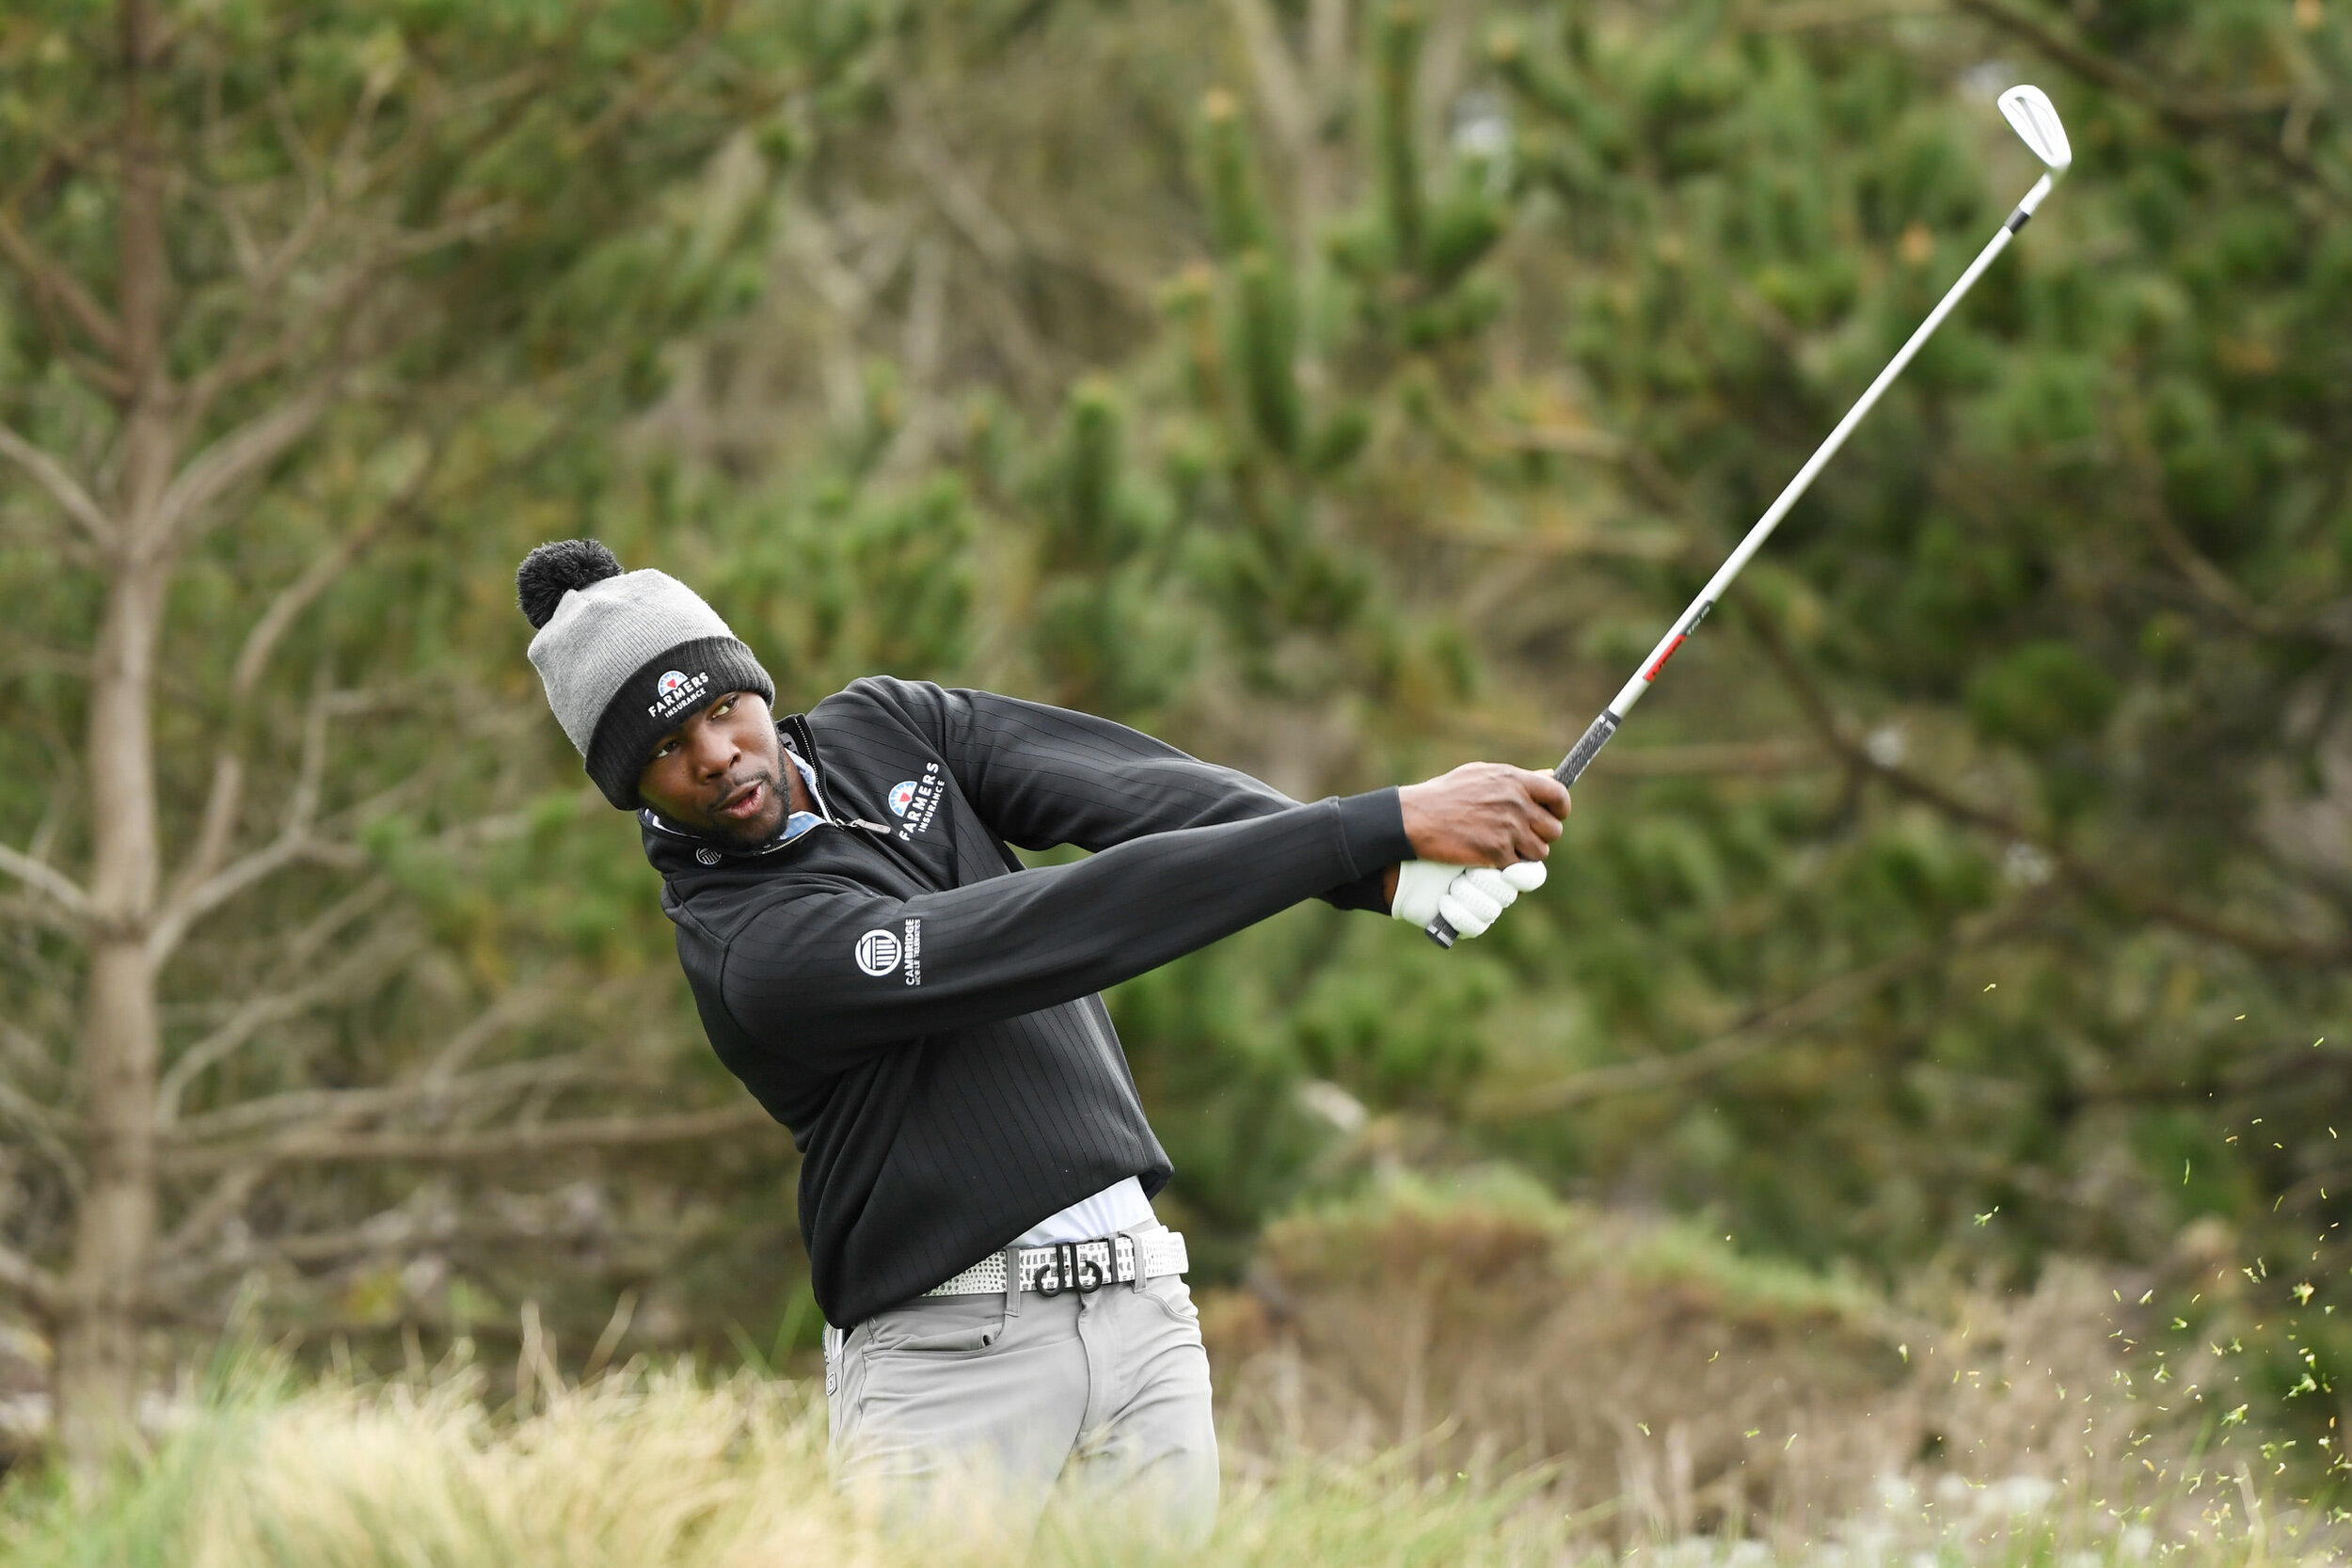  PEBBLE BEACH, CALIFORNIA - FEBRUARY 11: Kamaiu Johnson of the United States plays his shot from the third tee during the first round of the AT&T Pebble Beach Pro-Am at Spyglass Hill Golf Course on February 11, 2021 in Pebble Beach, California. (Phot